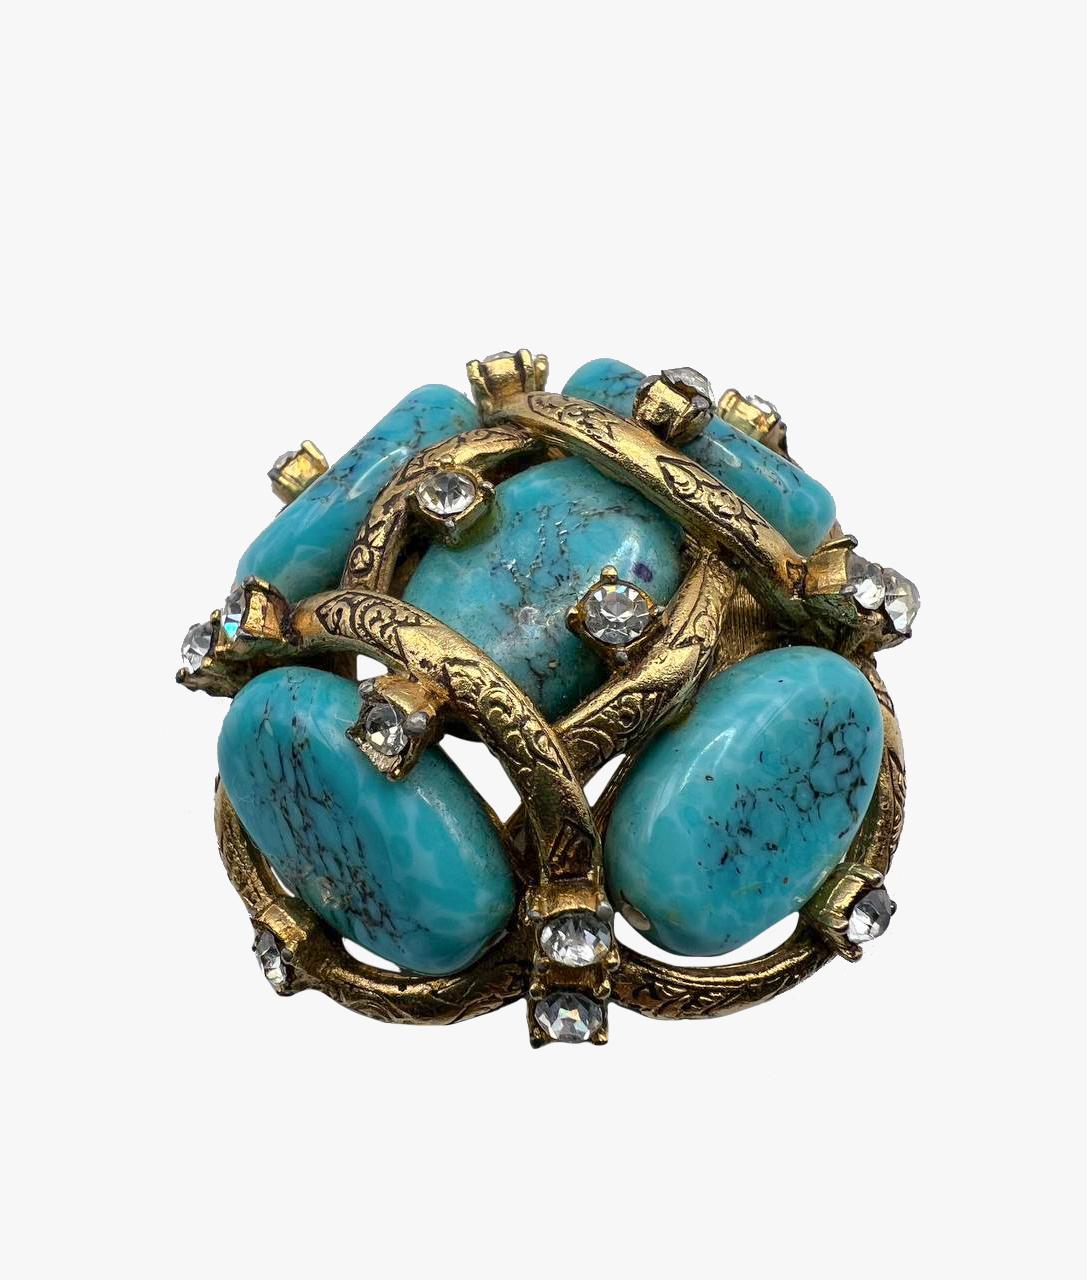 Stunning brooch with turquoise cluster, made by Robert Goossens  in 1961.

Handmade pate de verre beads made to simulate turquoise matrix set in a gilded bronze web scattered with pastes.

Dimensions –  4.8 x 4.8 cm,

Condition – very